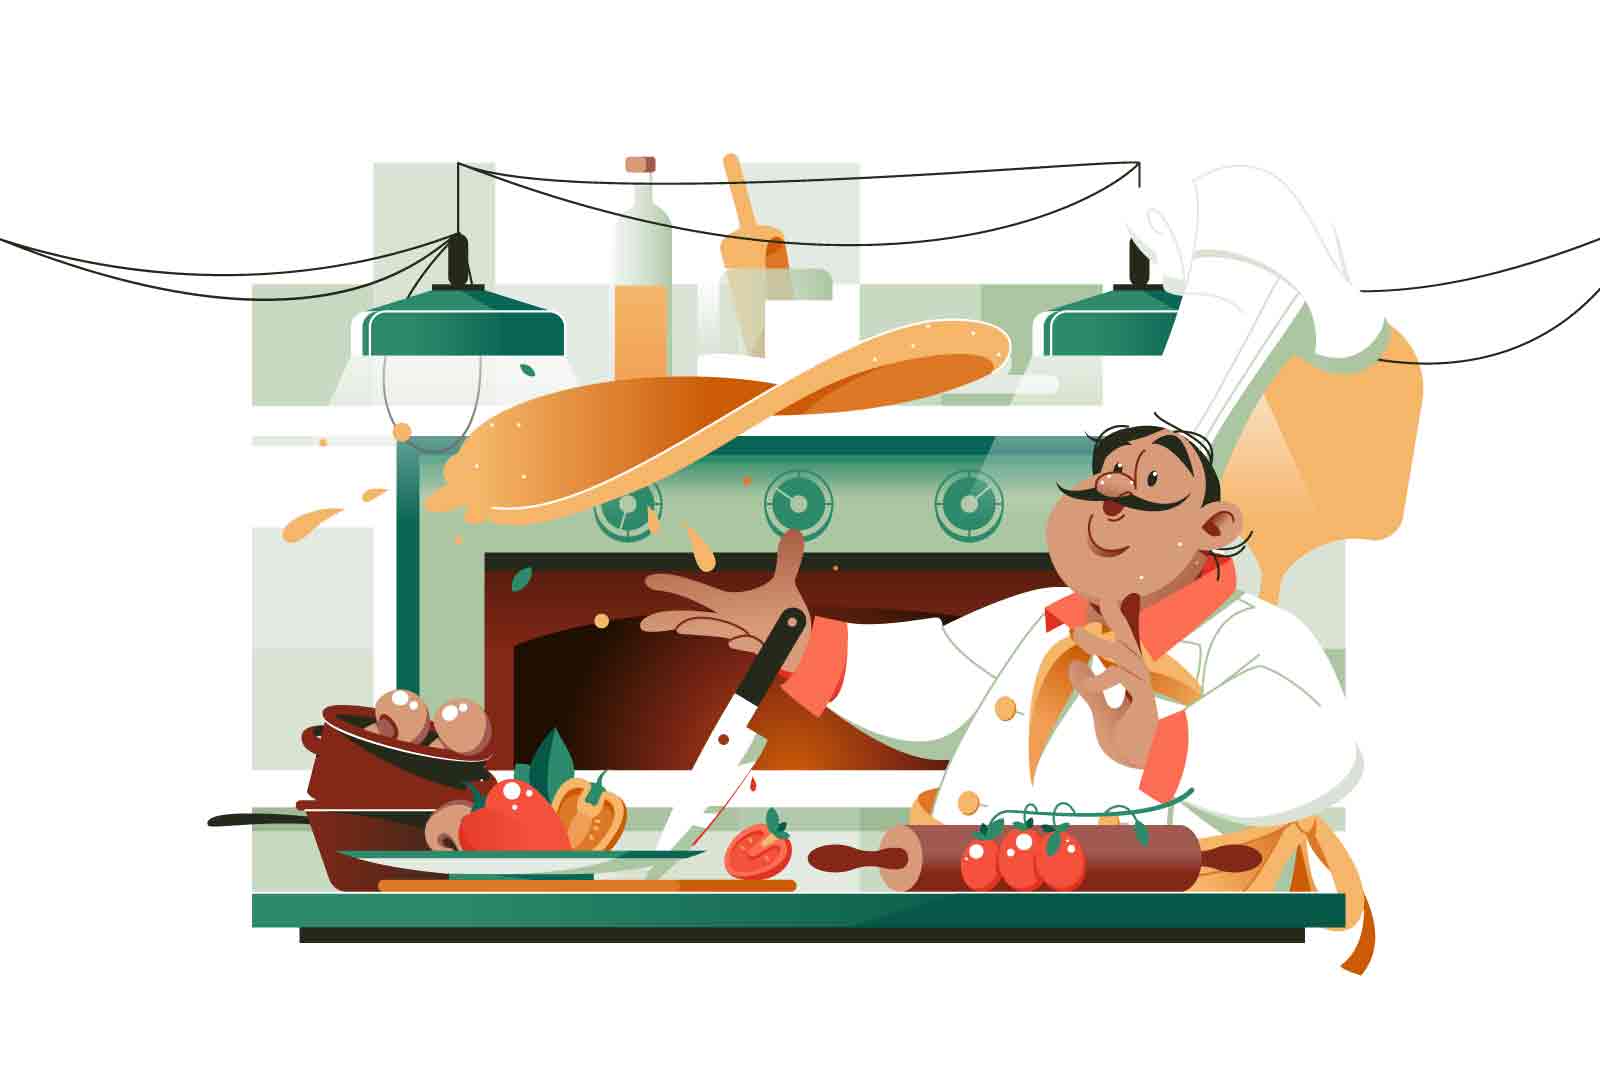 Pizzeria composition with chefs bake pizza vector illustration. Chef cooking pizza. Restaurant kitchen interior concept